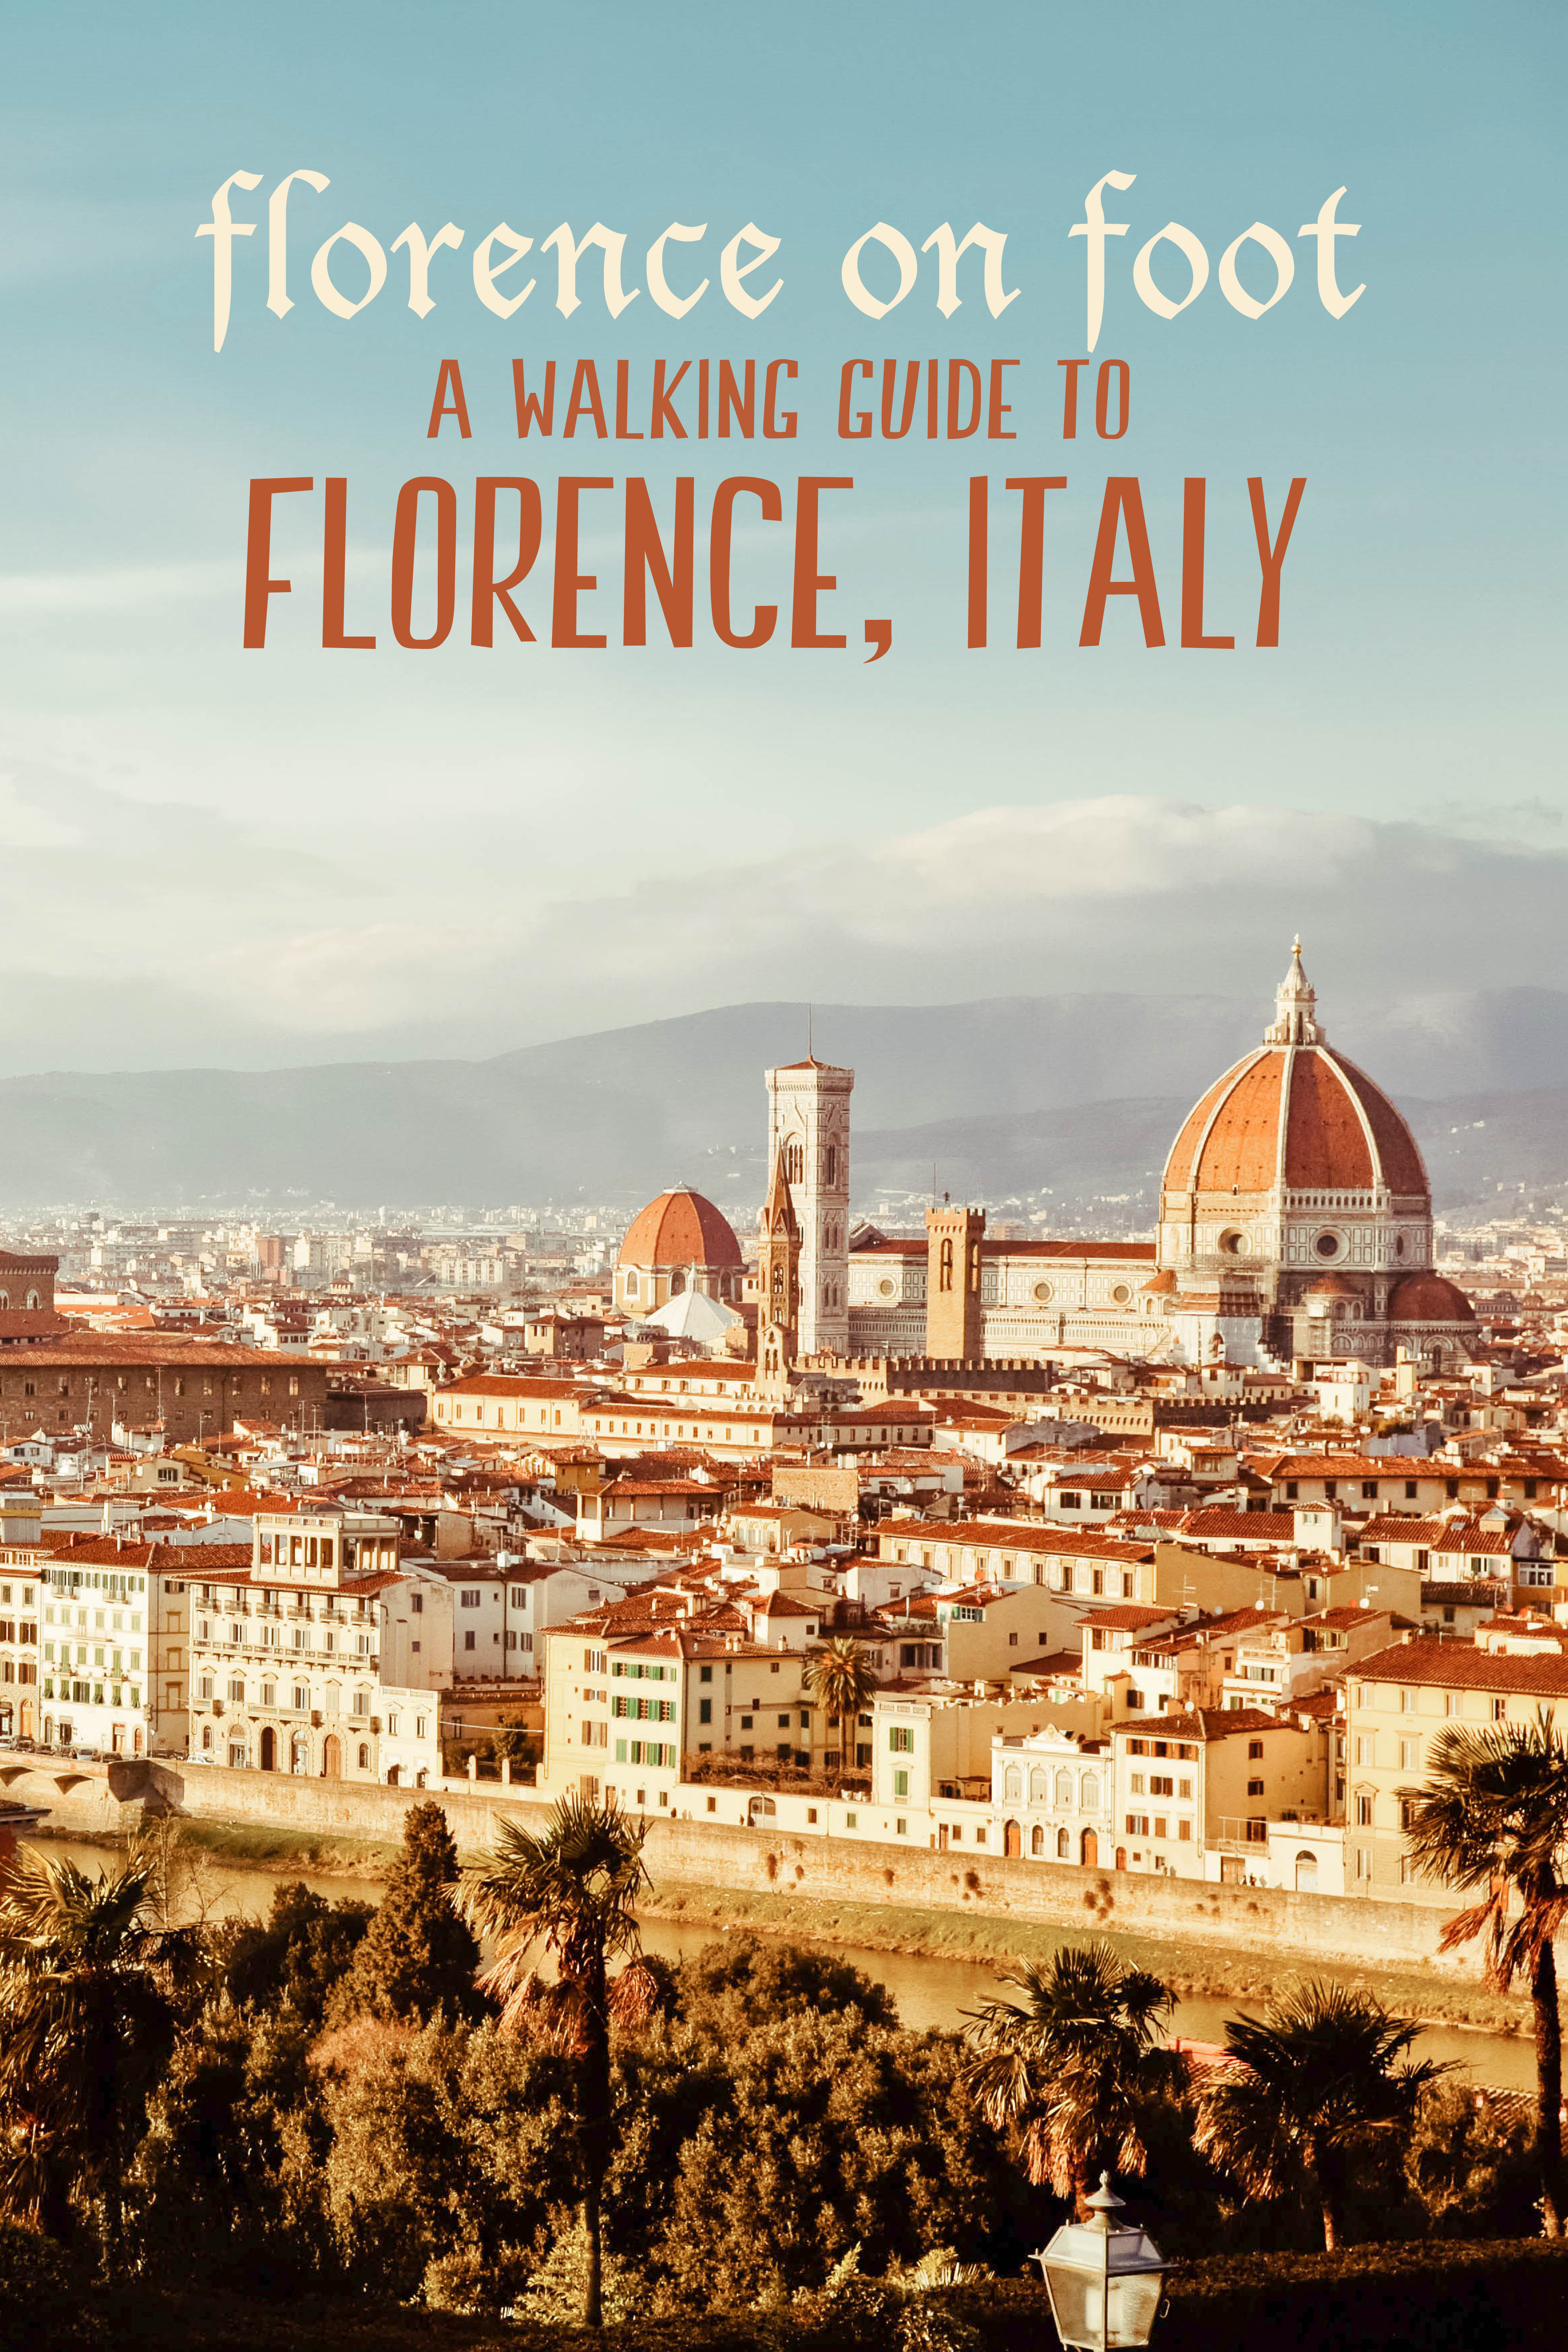 Florence on Foot: A Walking Guide to Florence, Italy